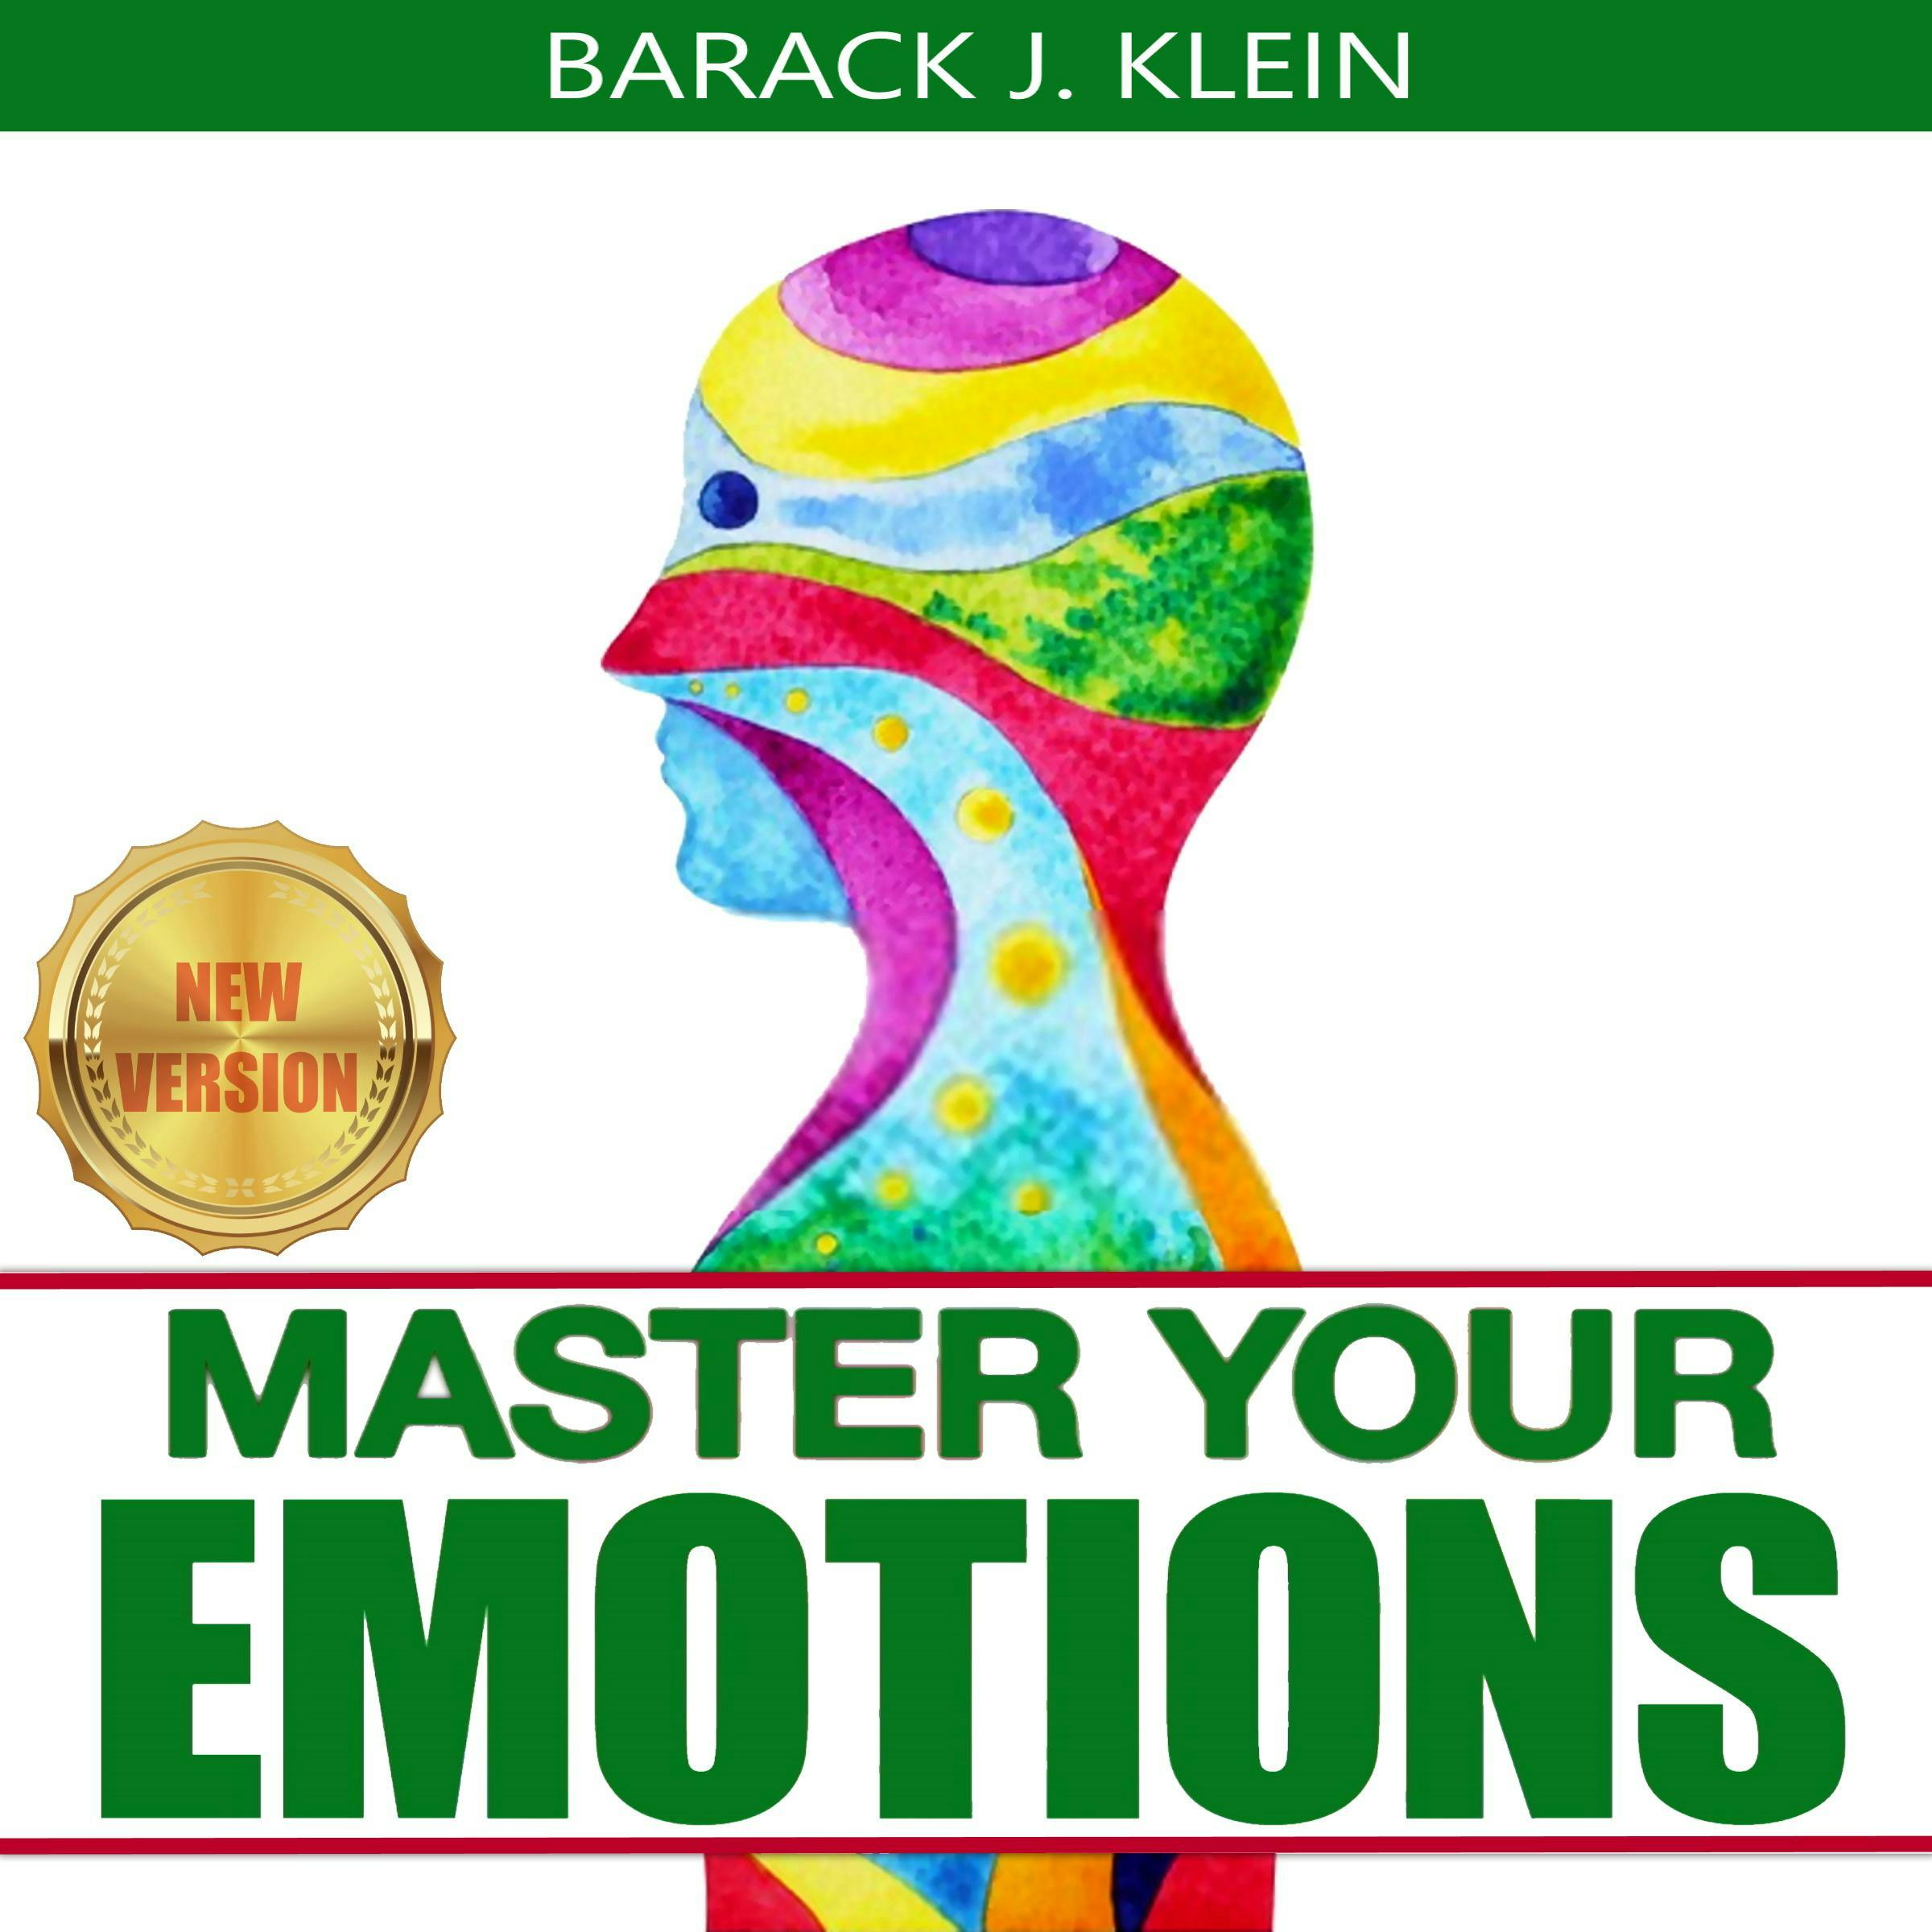 MASTER YOUR EMOTIONS: A Direct Path Through Mental Models, Cognitive Behavioral Therapy, Brain Improvement to Achieve Your Self-Esteem Goals & Overcome Negativity. NEW VERSION - undefined